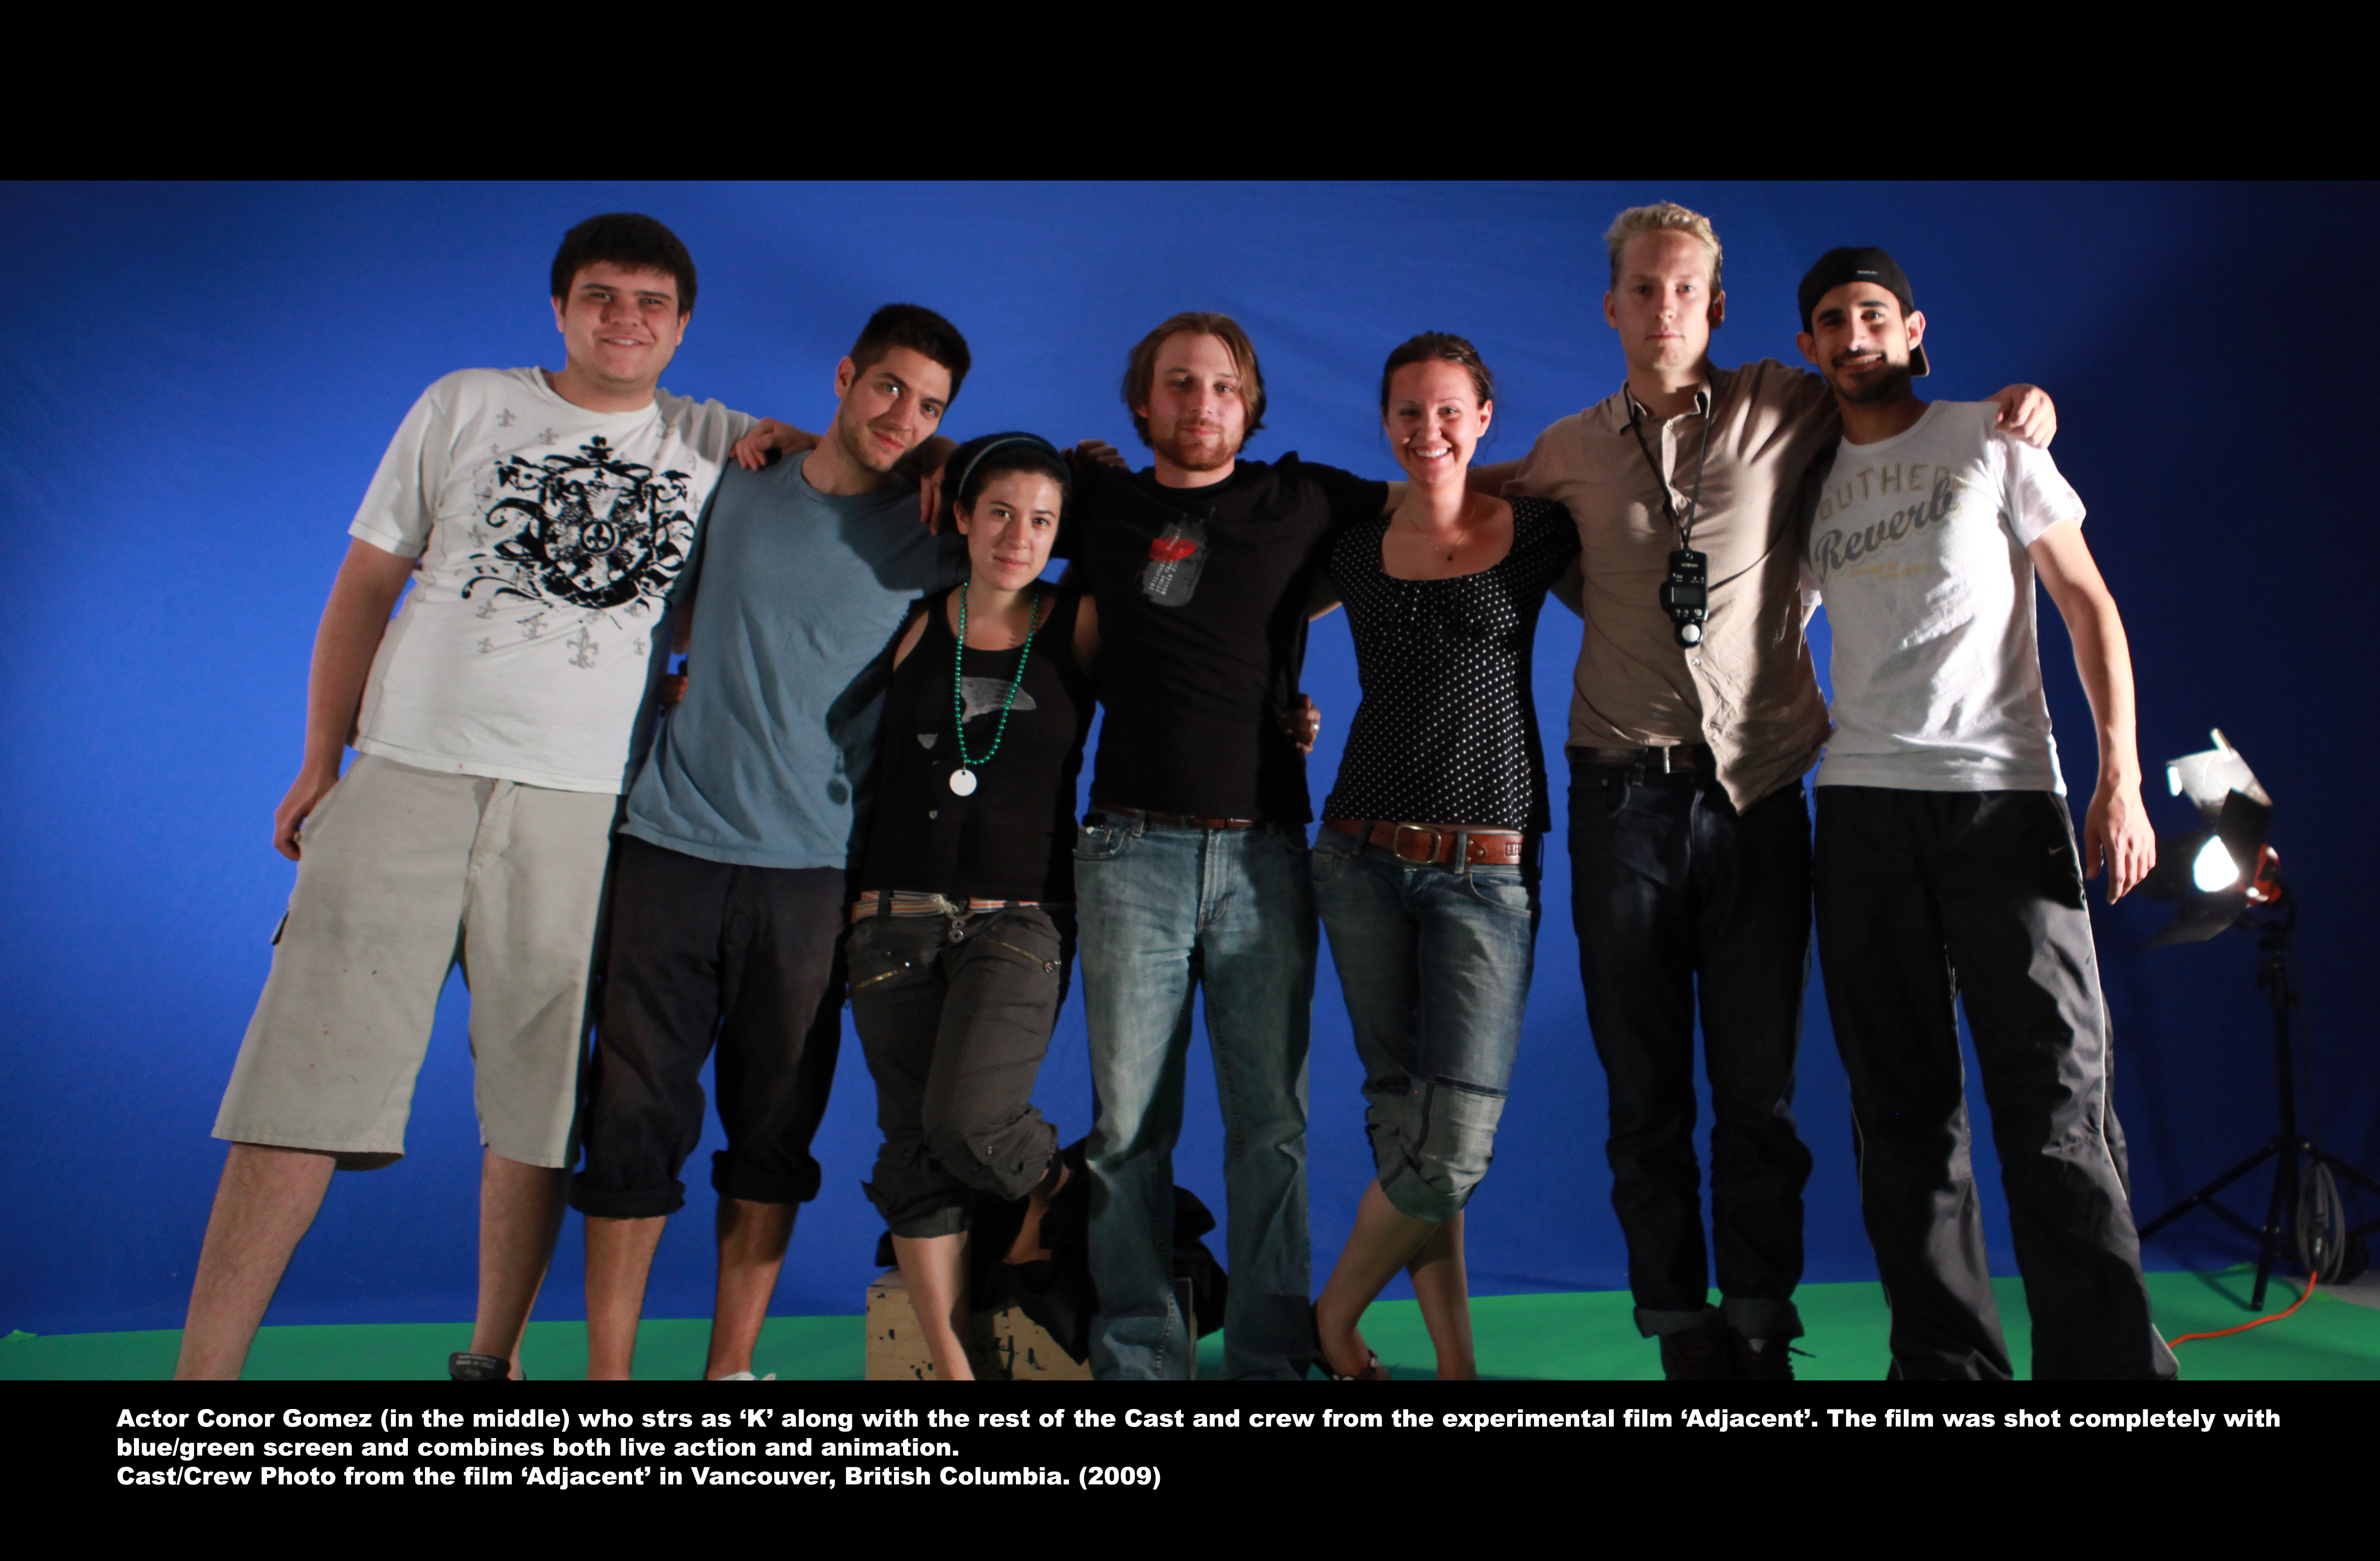 Conor Gomez (middle) with the crew of the 2009 experiential film 'Adjacent'. The entire film was shot on blue/green screen.